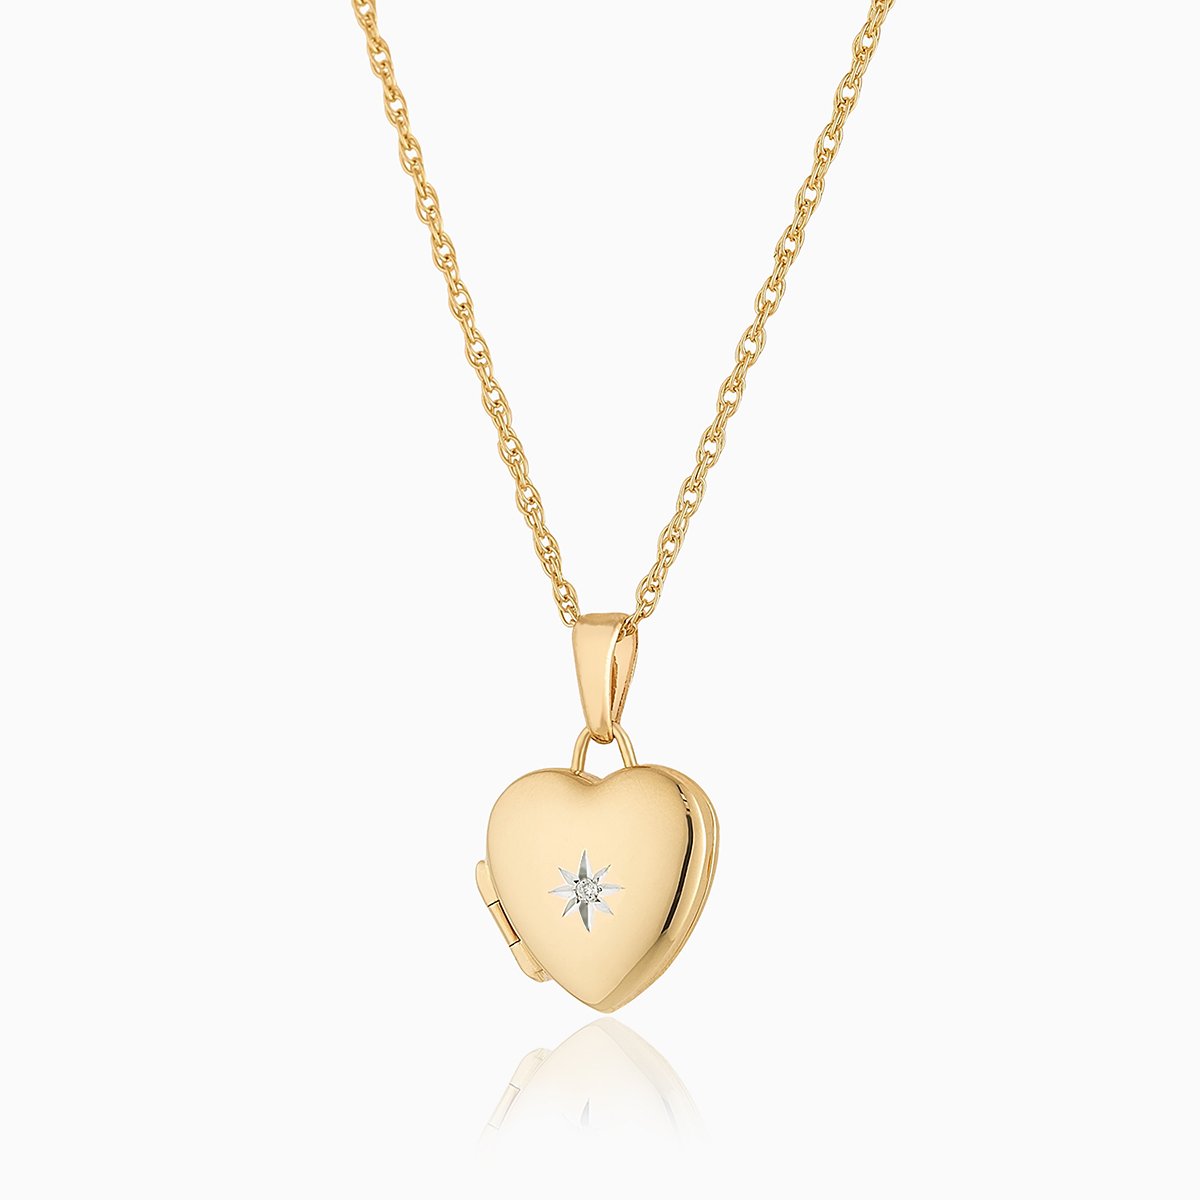 Petite 9 ct gold heart locket set with a diamond on a 9 ct gold rope chain.